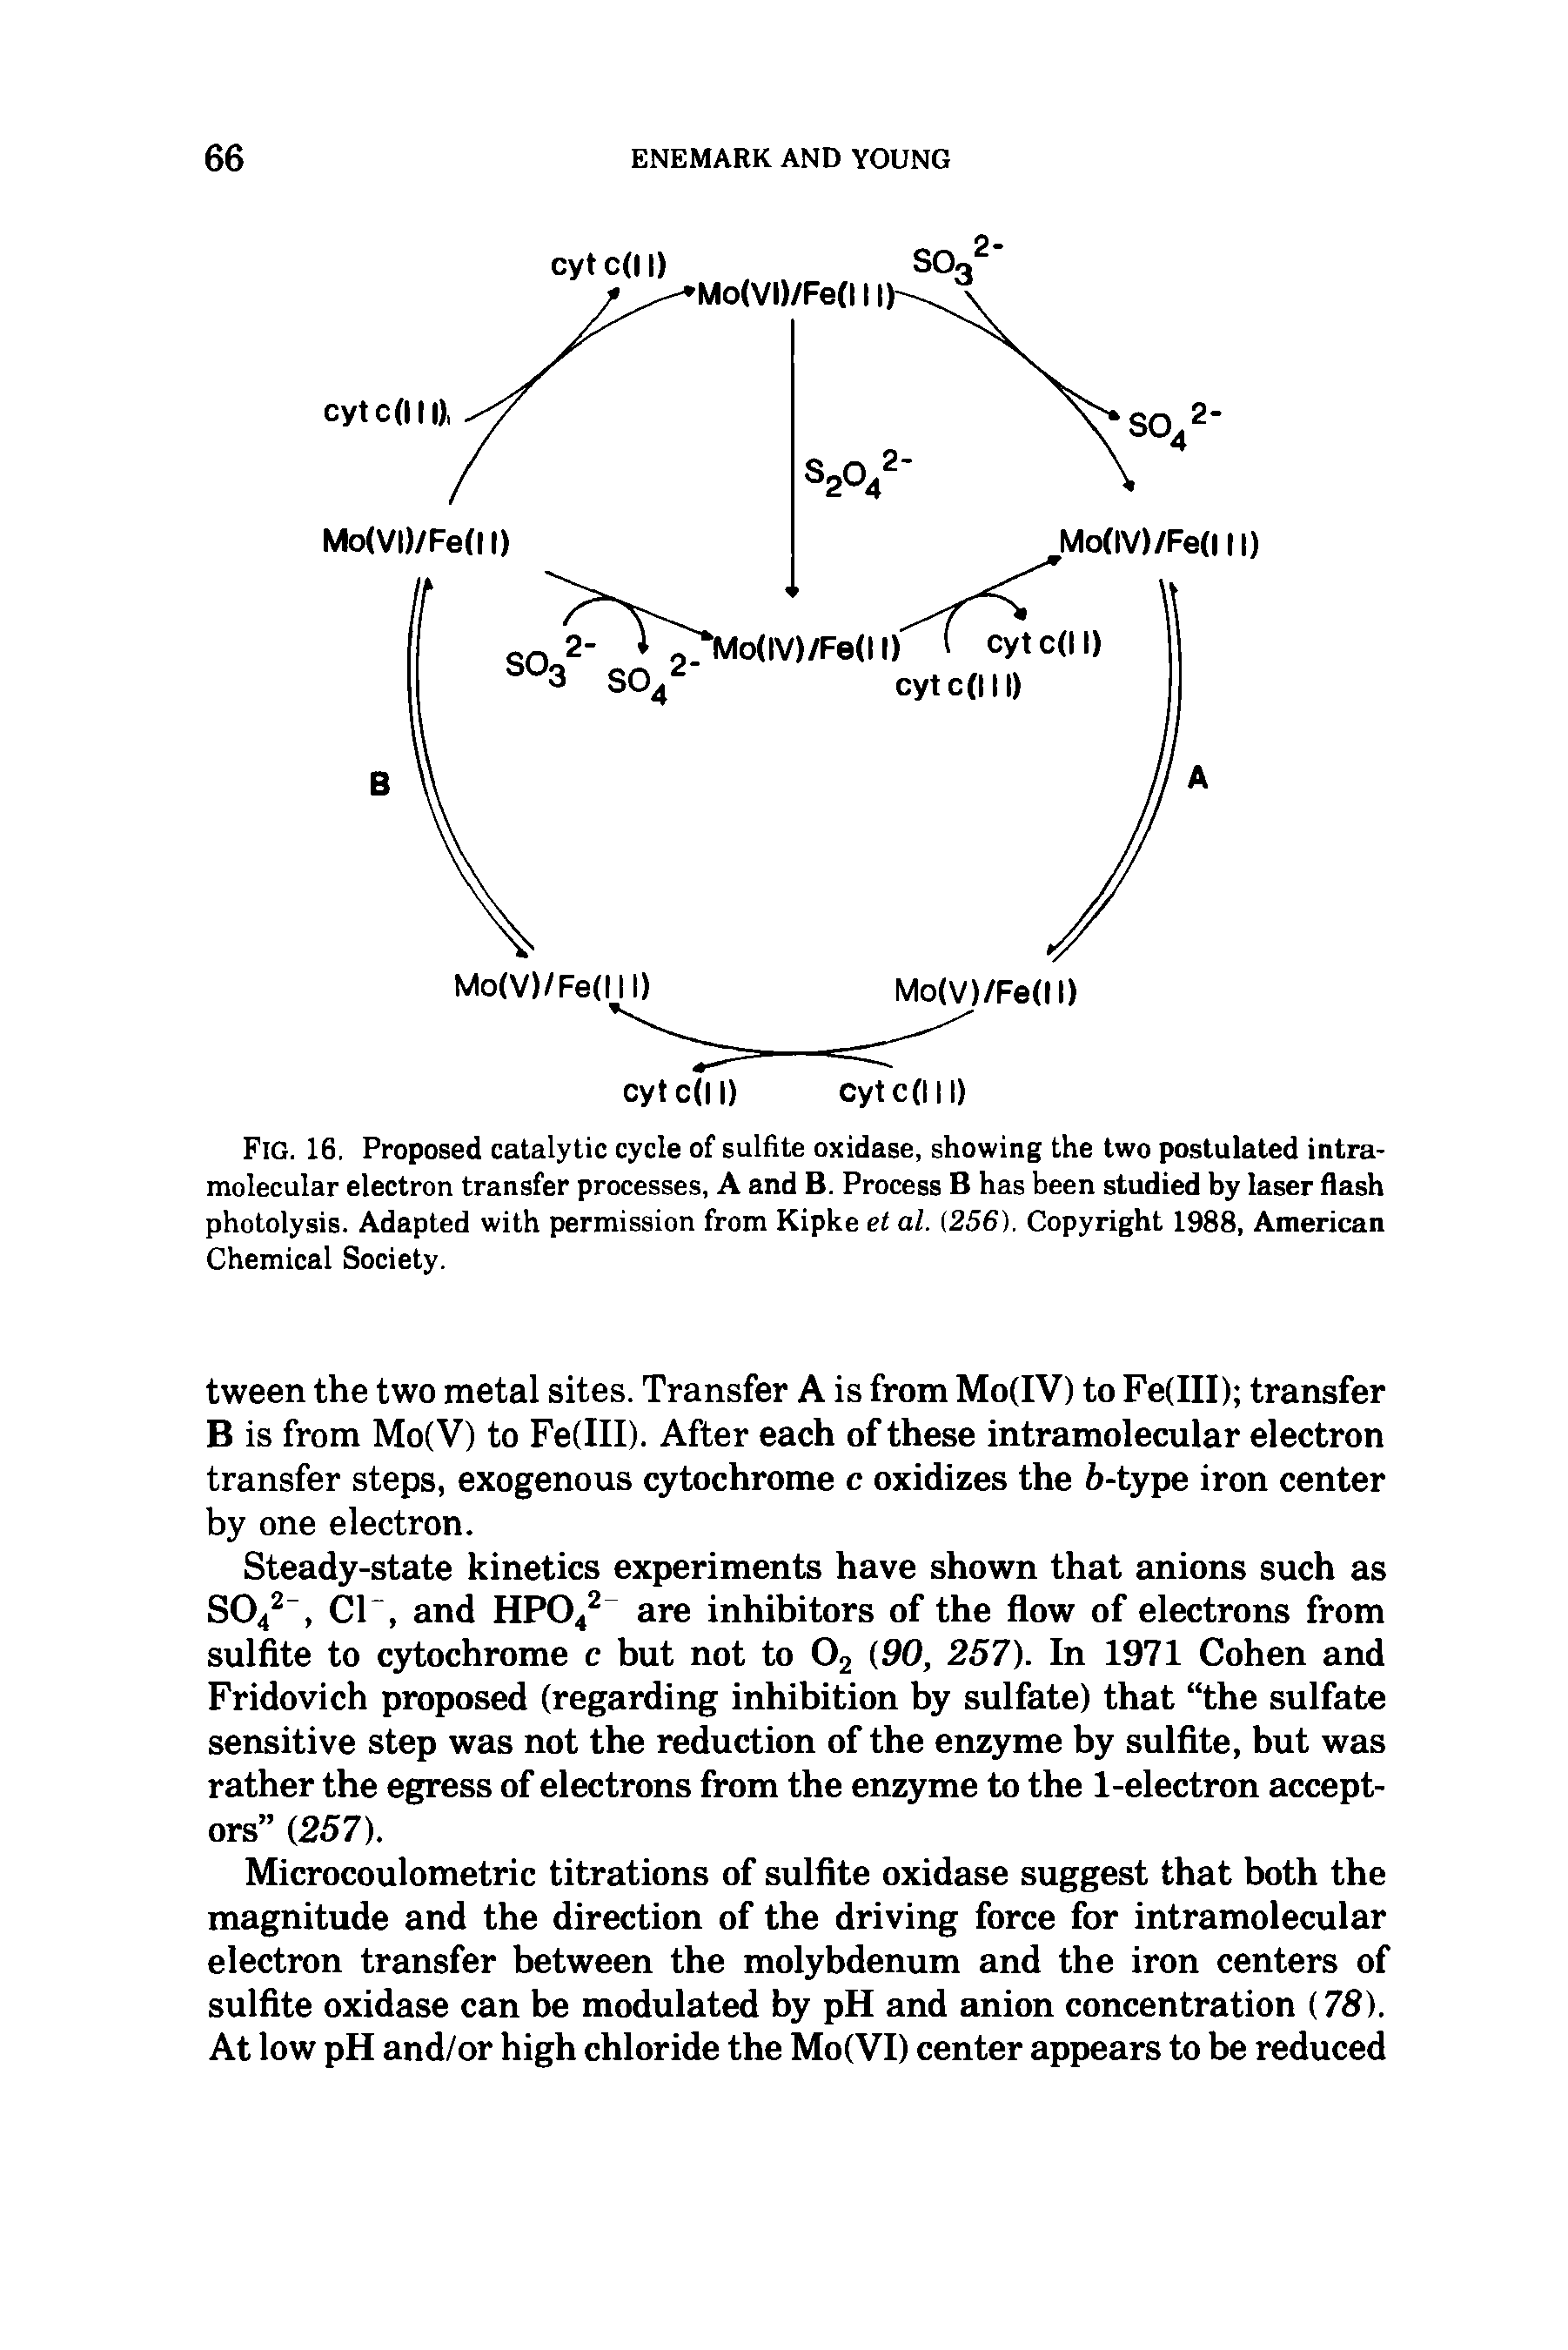 Fig. 16. Proposed catalytic cycle of sulfite oxidase, showing the two postulated intramolecular electron transfer processes, A and B. Process B has been studied by laser flash photolysis. Adapted with permission from Kipke et al. (256). Copyright 1988, American Chemical Society.